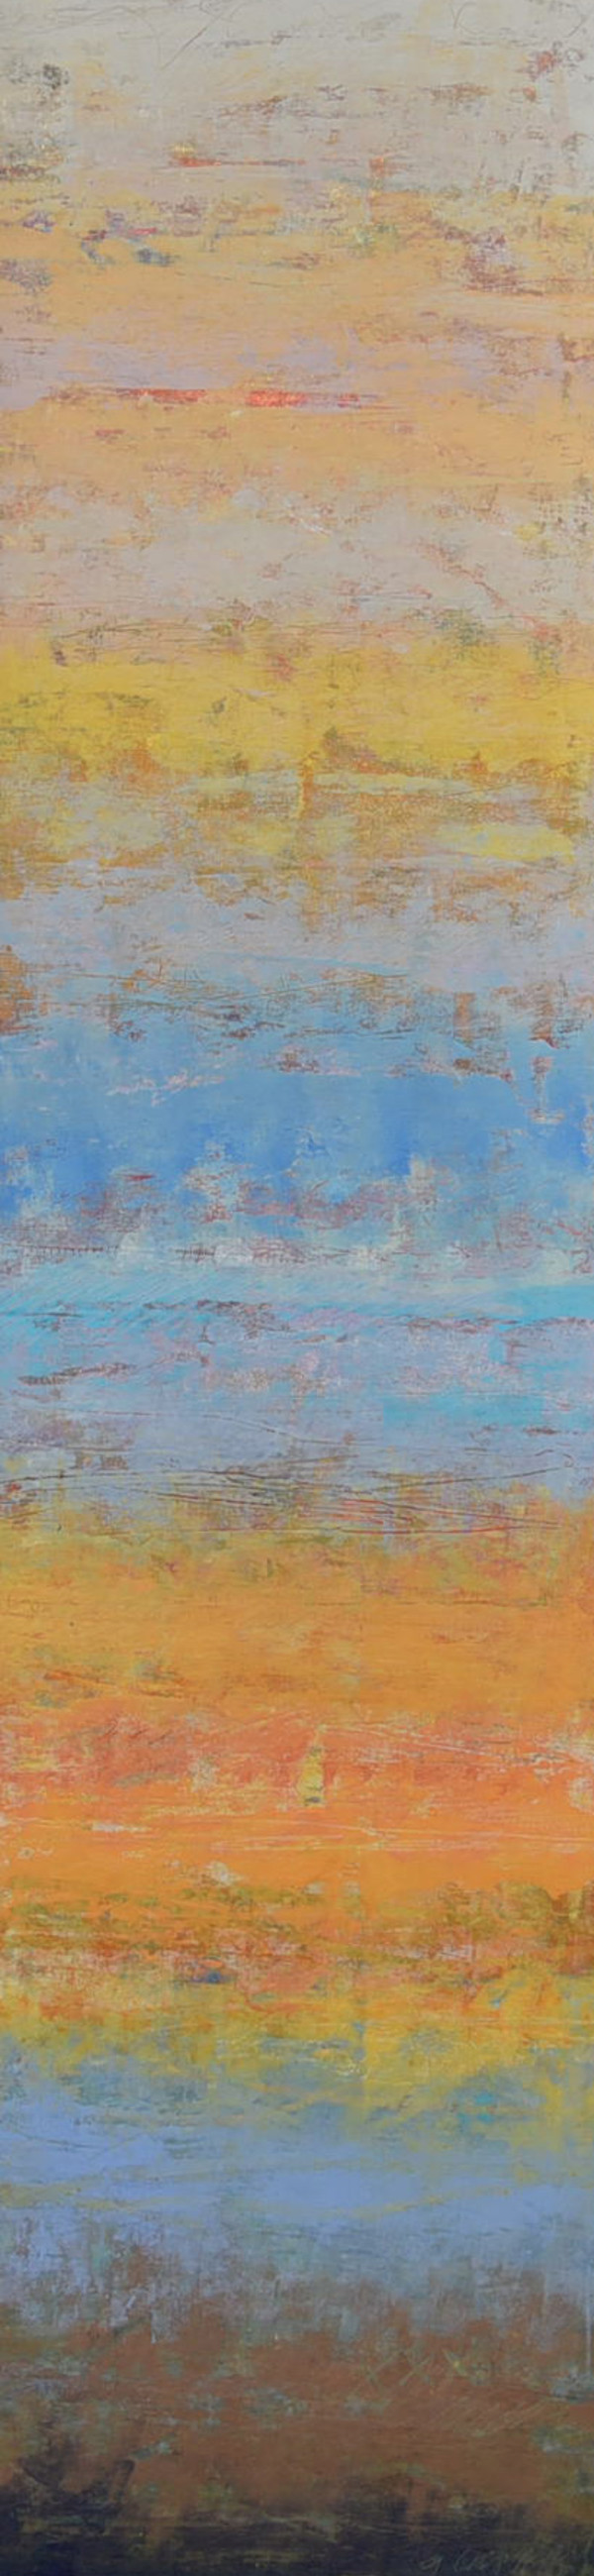 Taking My Time 3, 48x12" by Ginnie Cappaert